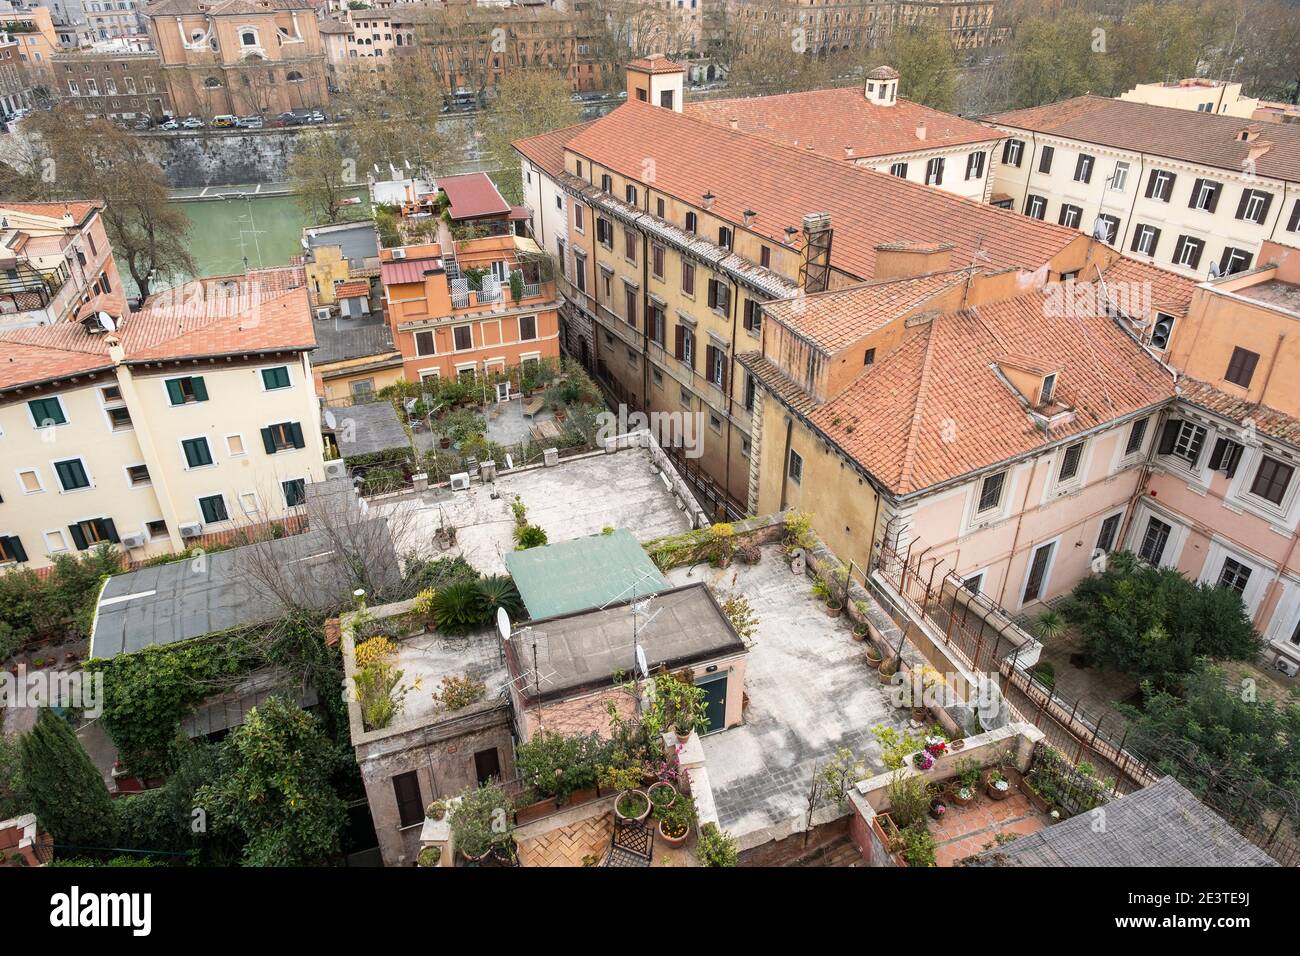 Aerial view looking down onto rooftops and roof terraces of buildings on the banks of the River Tiber, Trastevere, Rome, Italy Stock Photo